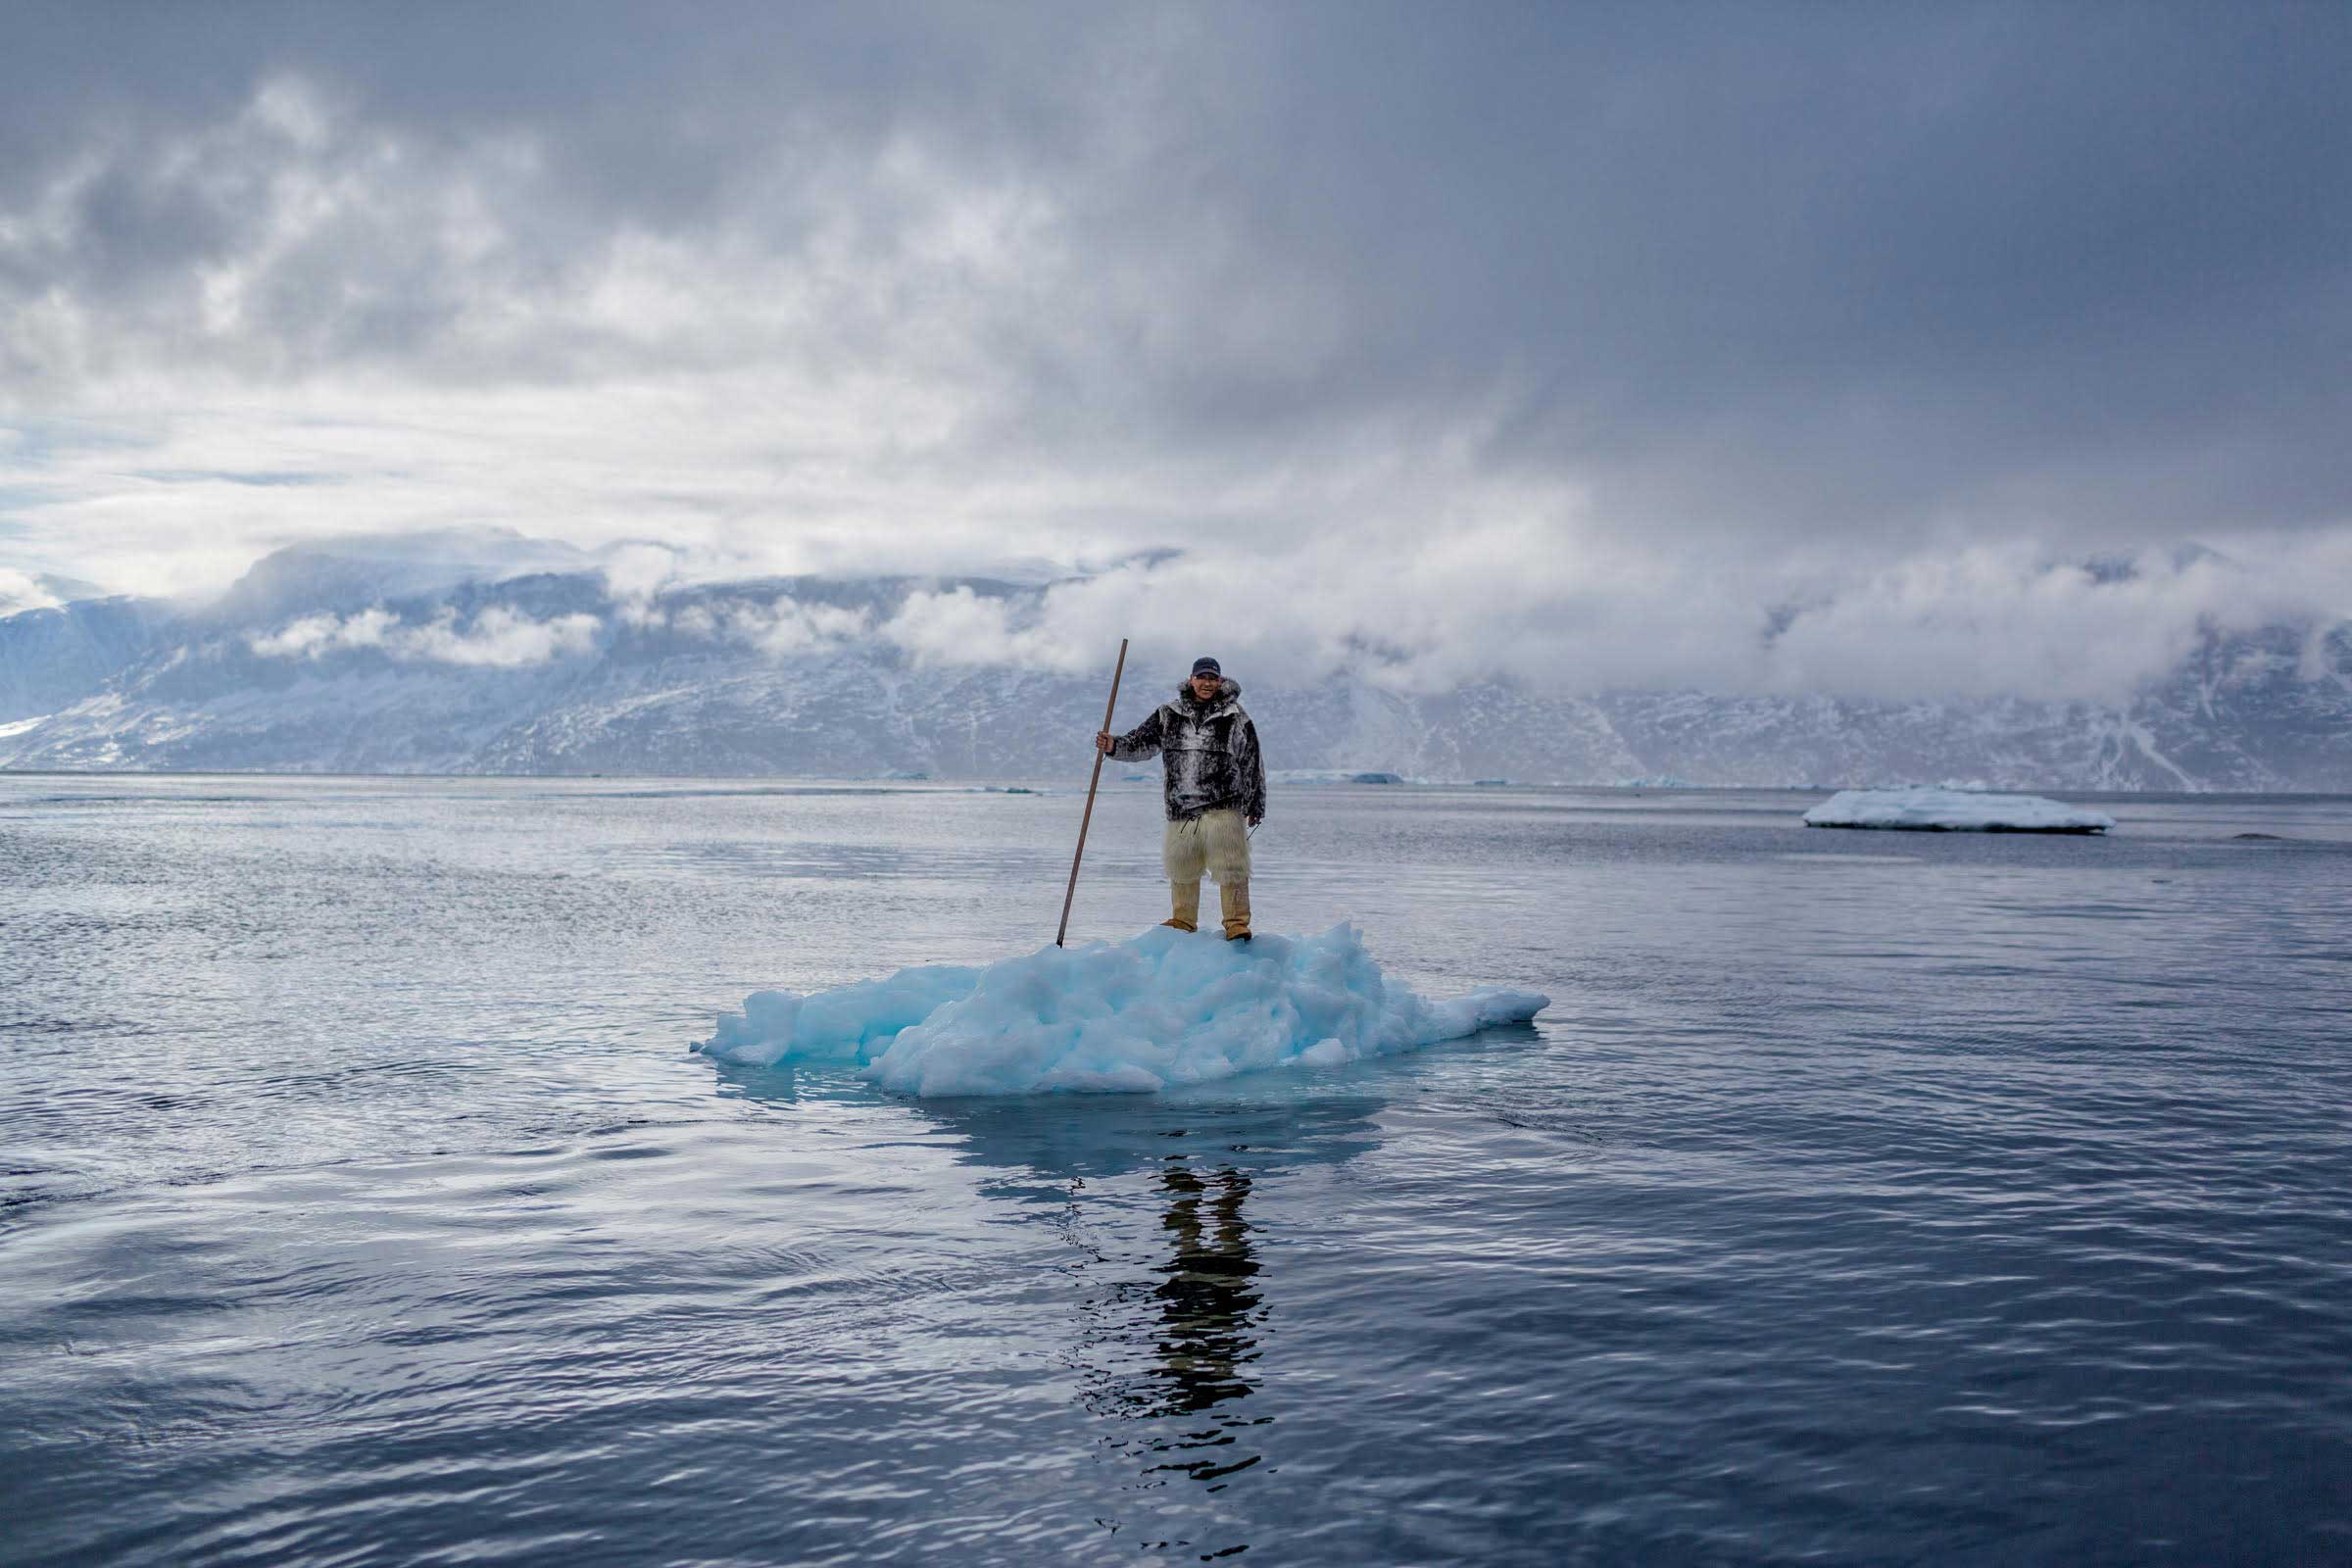 From the November issue of National Geographic magazine: How Melting Ice Changes One Country’s Way of Life Albert Lukassen’s world is melting around him. When the 64-year-old Inuit man was young, he could hunt by dogsled on the frozen Uummannaq Fjord, on Greenland’s west coast, until June. This photo shows him there in April.